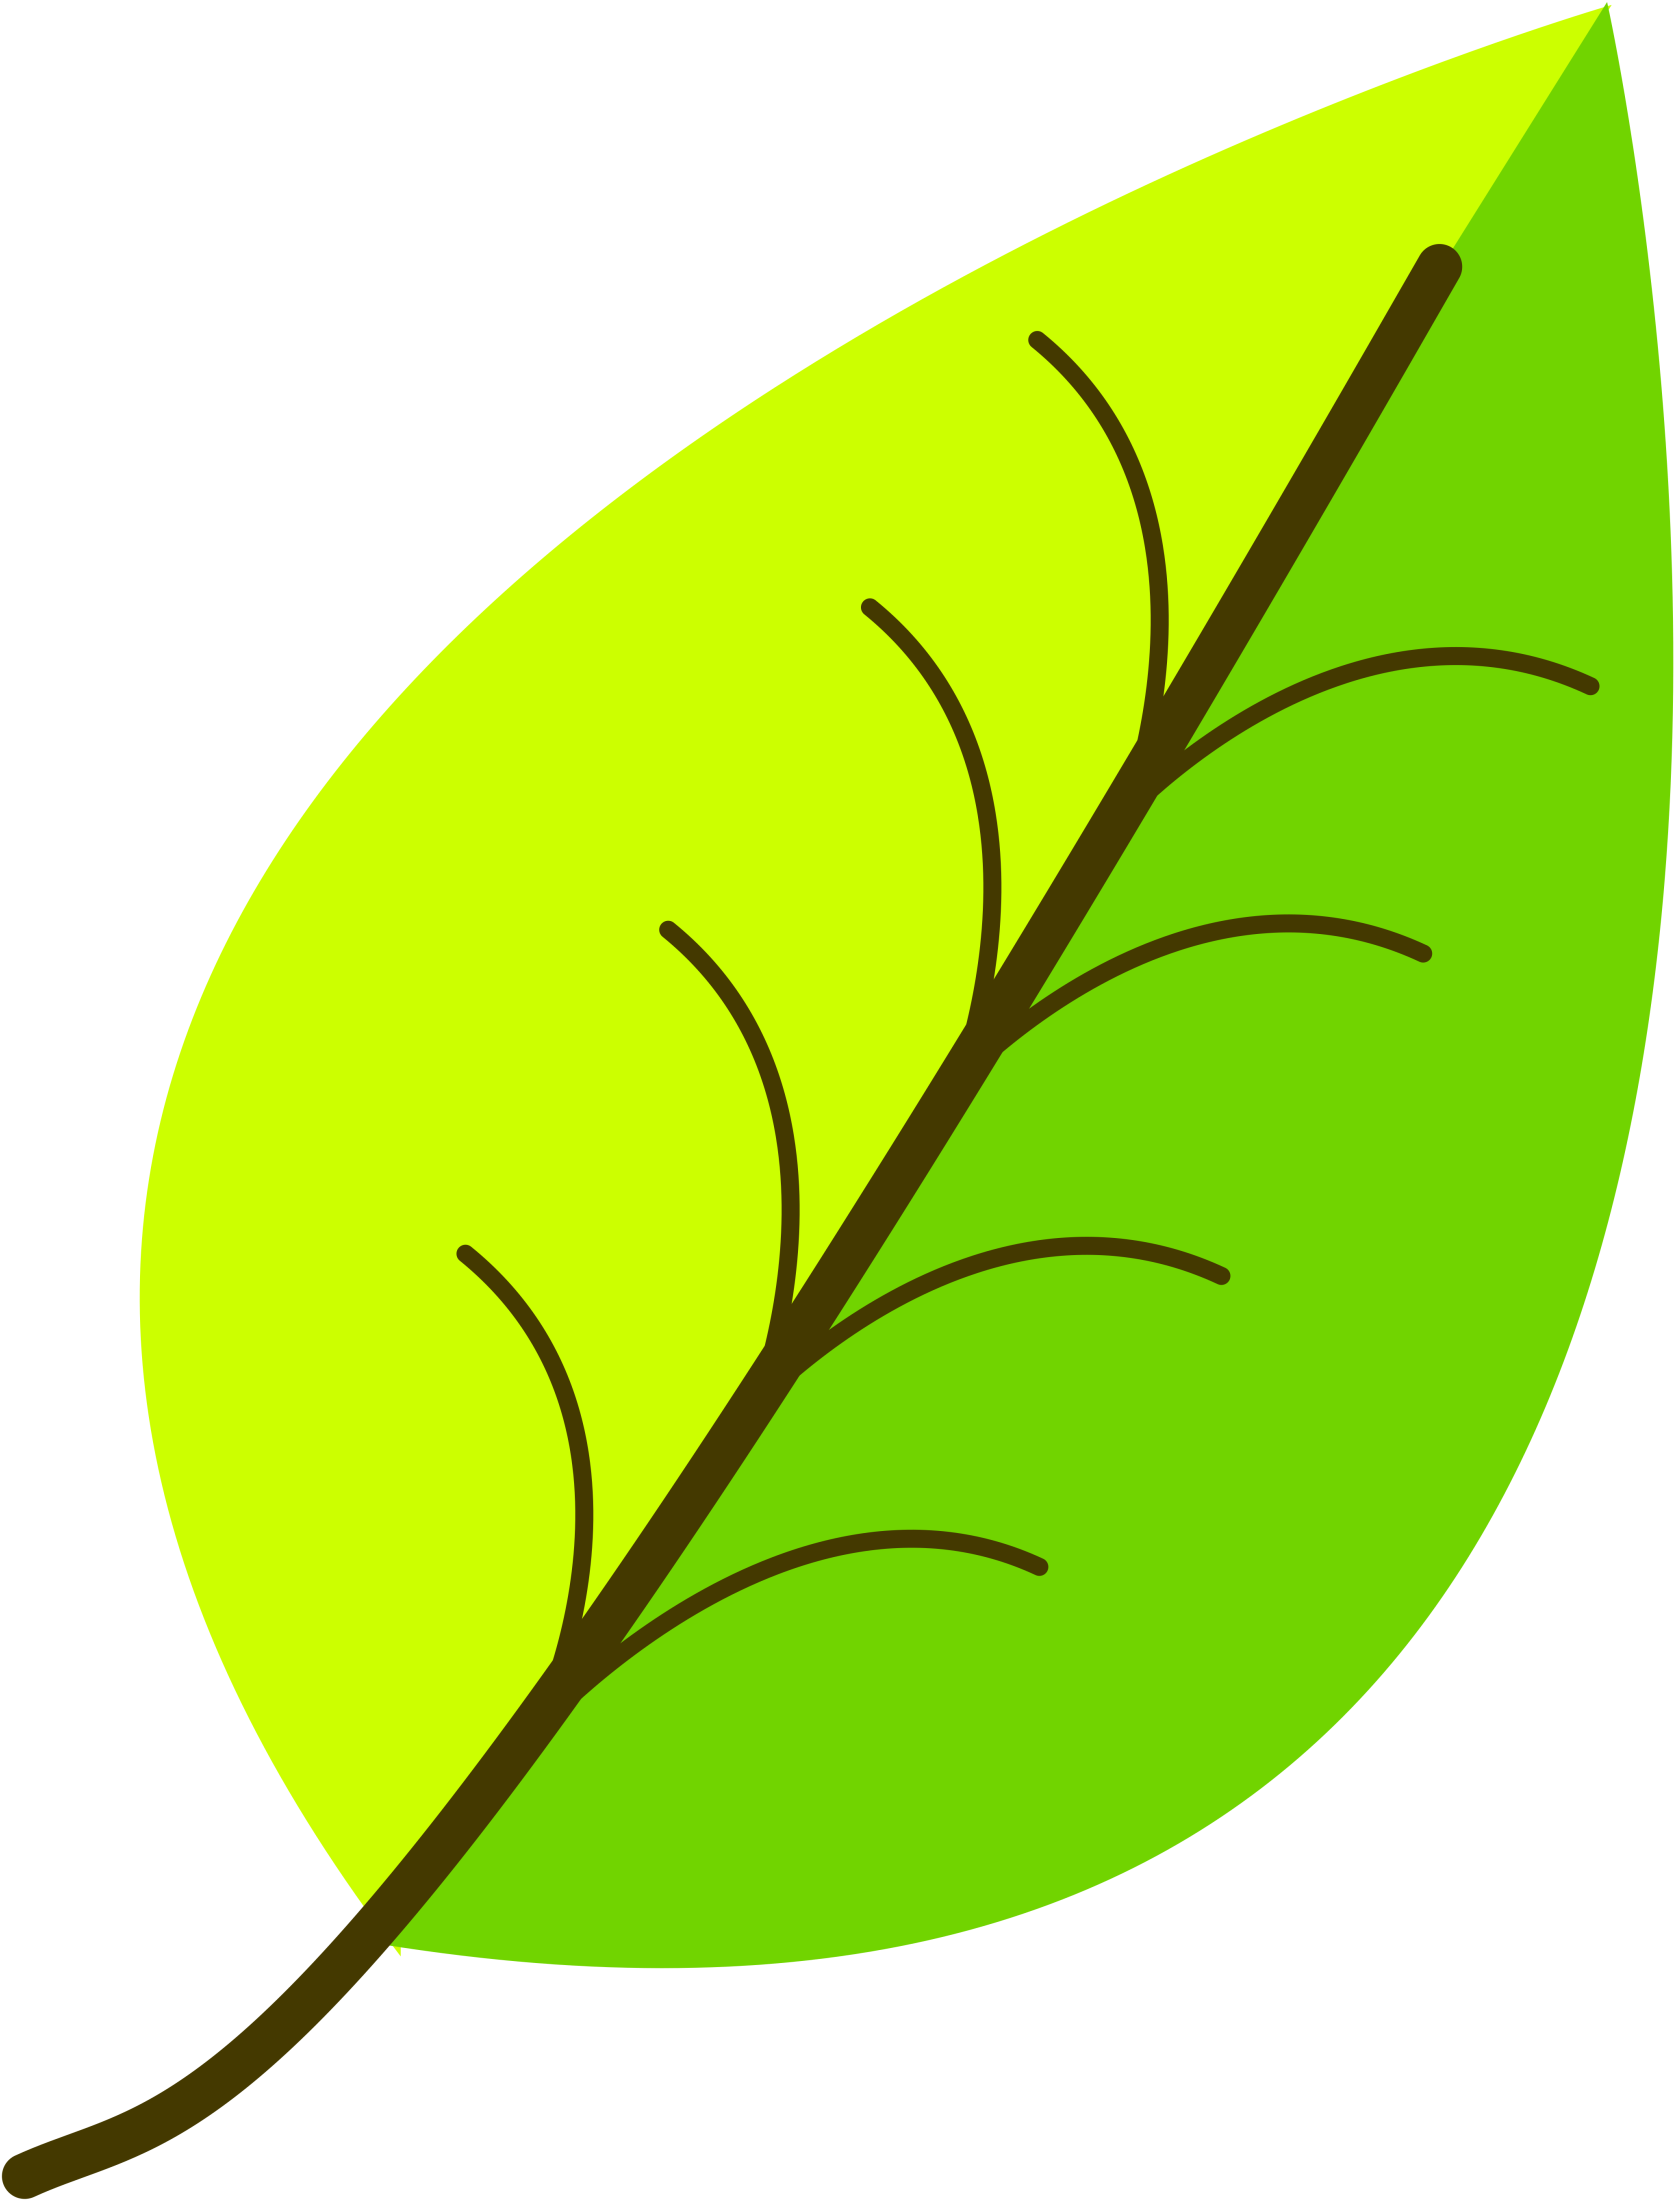 Leaf- With Venation, Two Color - Leaf Clipart Png (2400x2400)